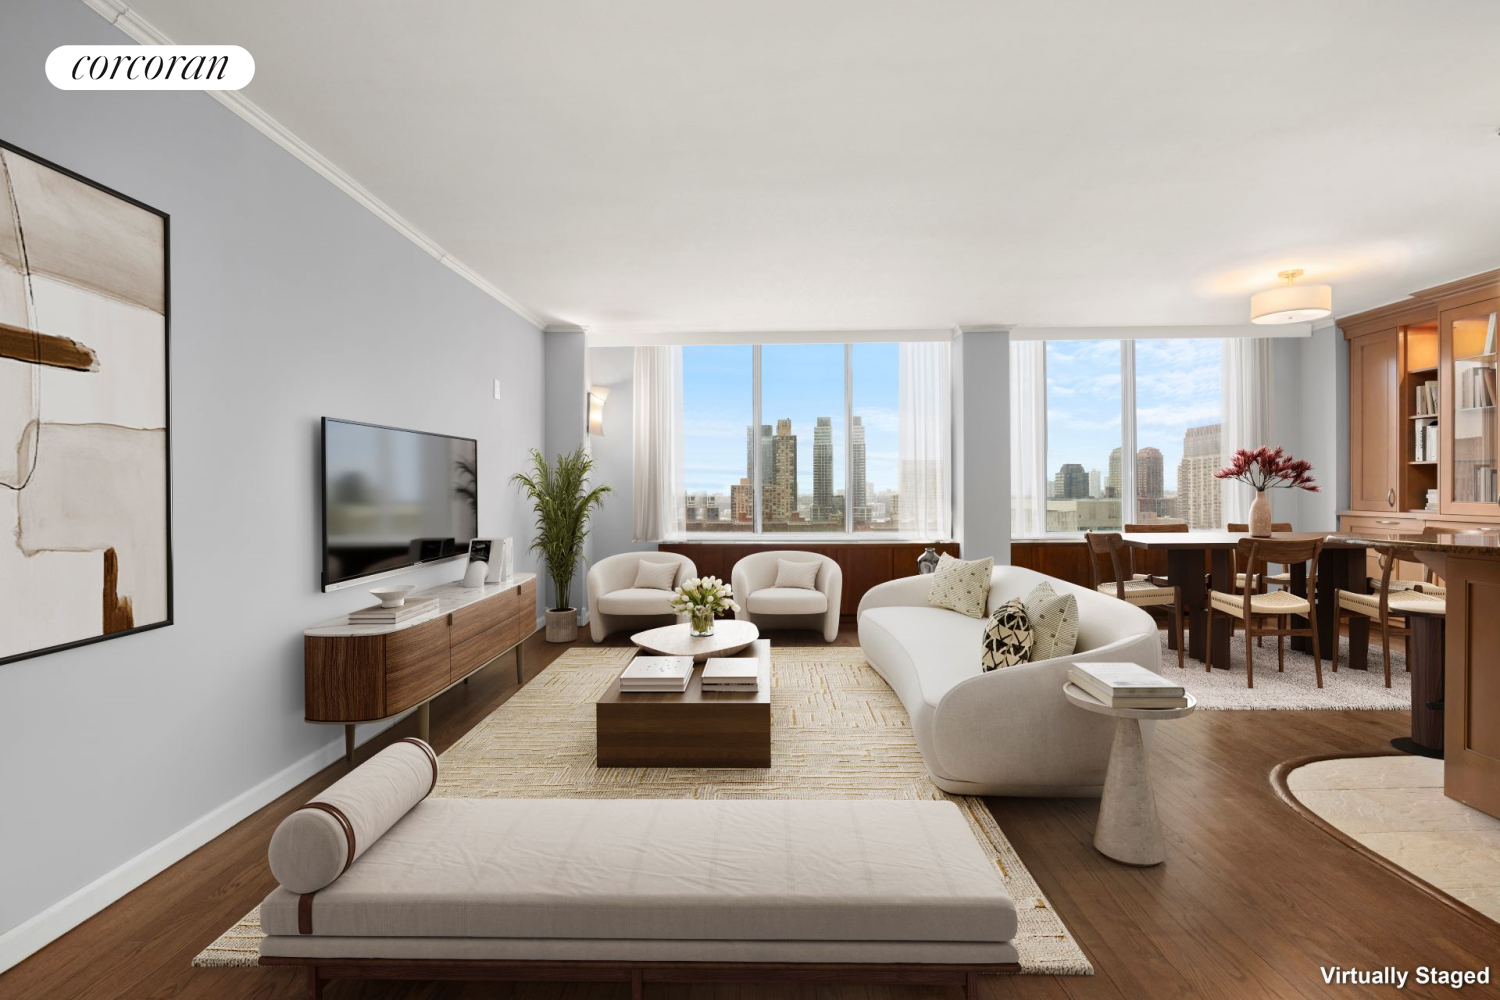 61 West 62nd Street 16Mn, Lincoln Sq, Upper West Side, NYC - 4 Bedrooms  
3 Bathrooms  
8 Rooms - 